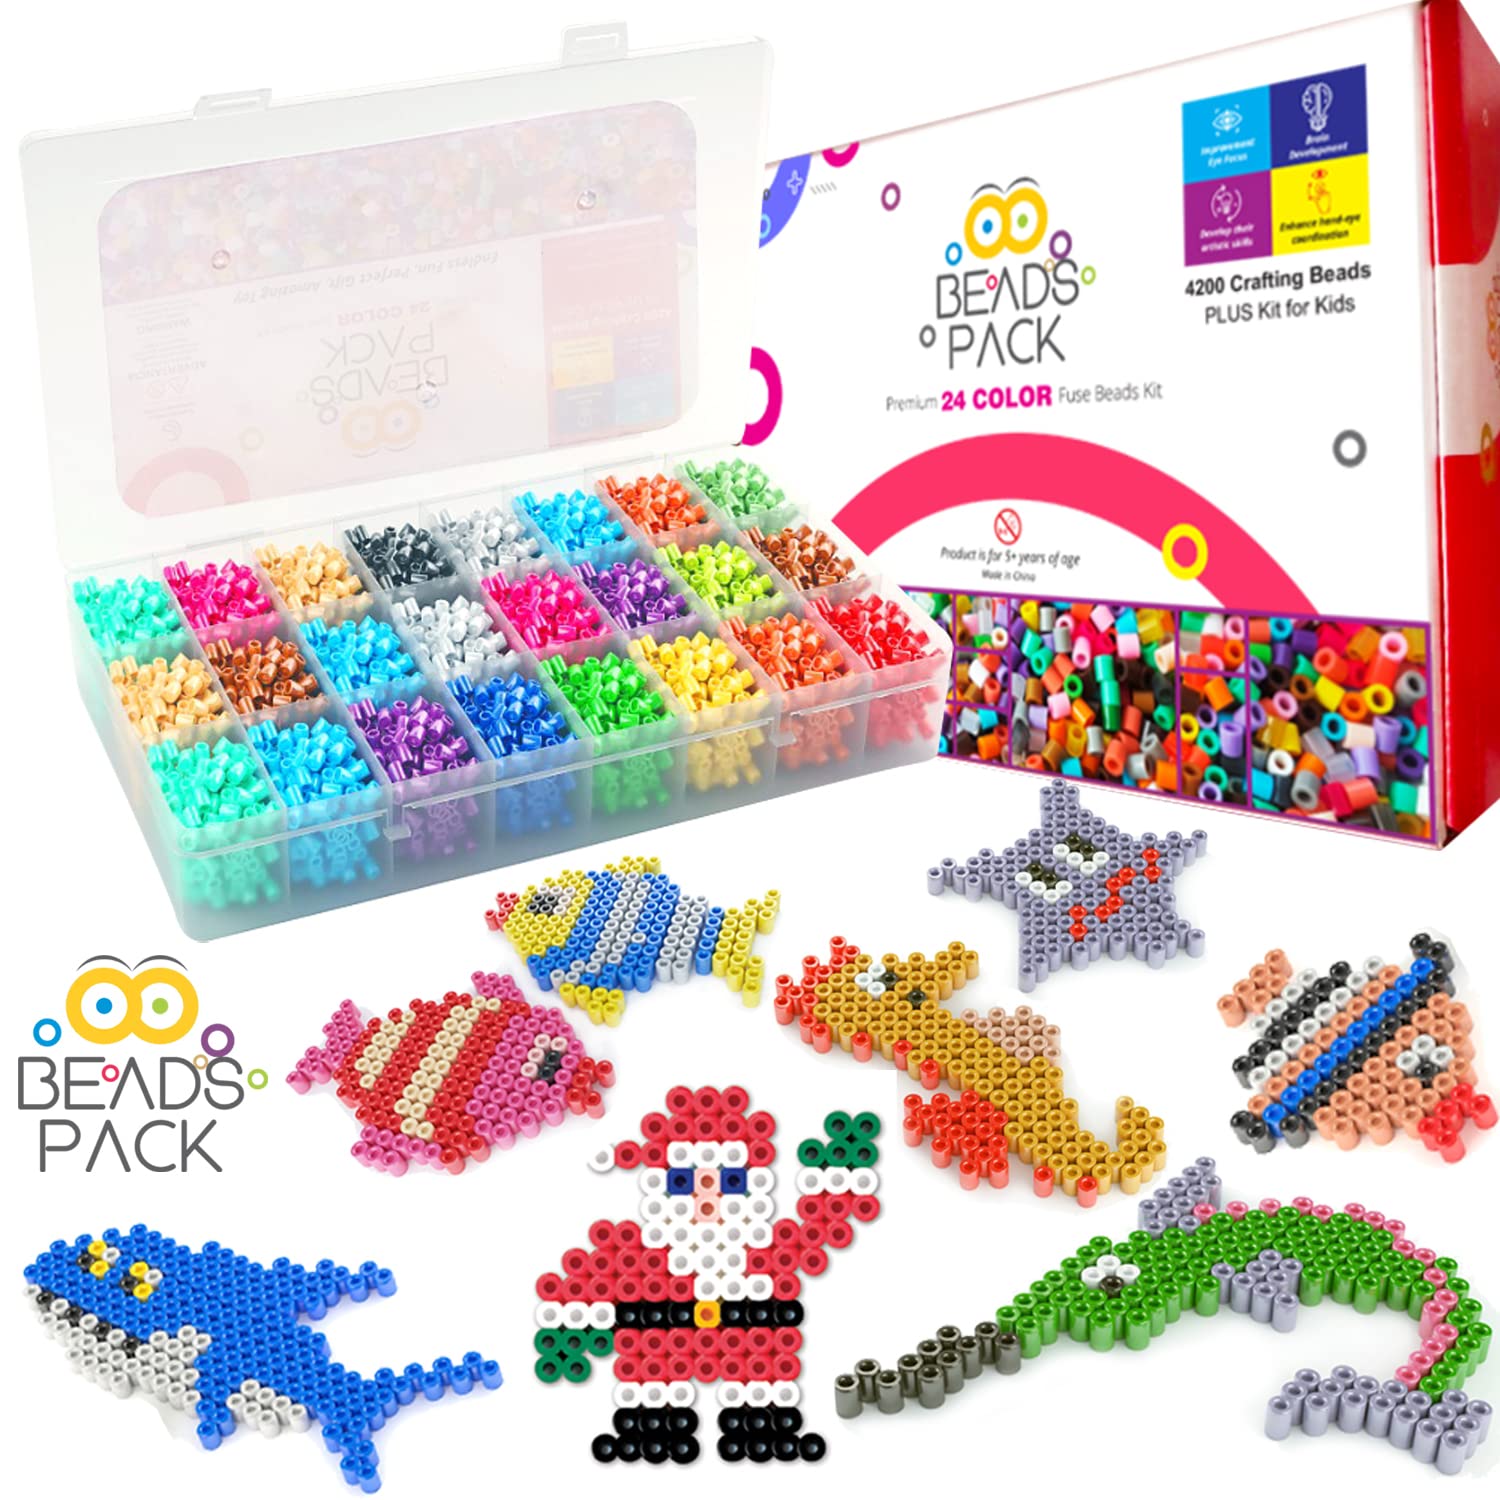 BeadsPack Fuse Beads Kit for Kids with 4200 Beads 5mm - 1 Pegboard,  Tweezer, Pattern & Iron Paper 24 Assorted Color Iron-On Melty Beads for Kids  Crafts & Gift Ideal for All Occasions Large